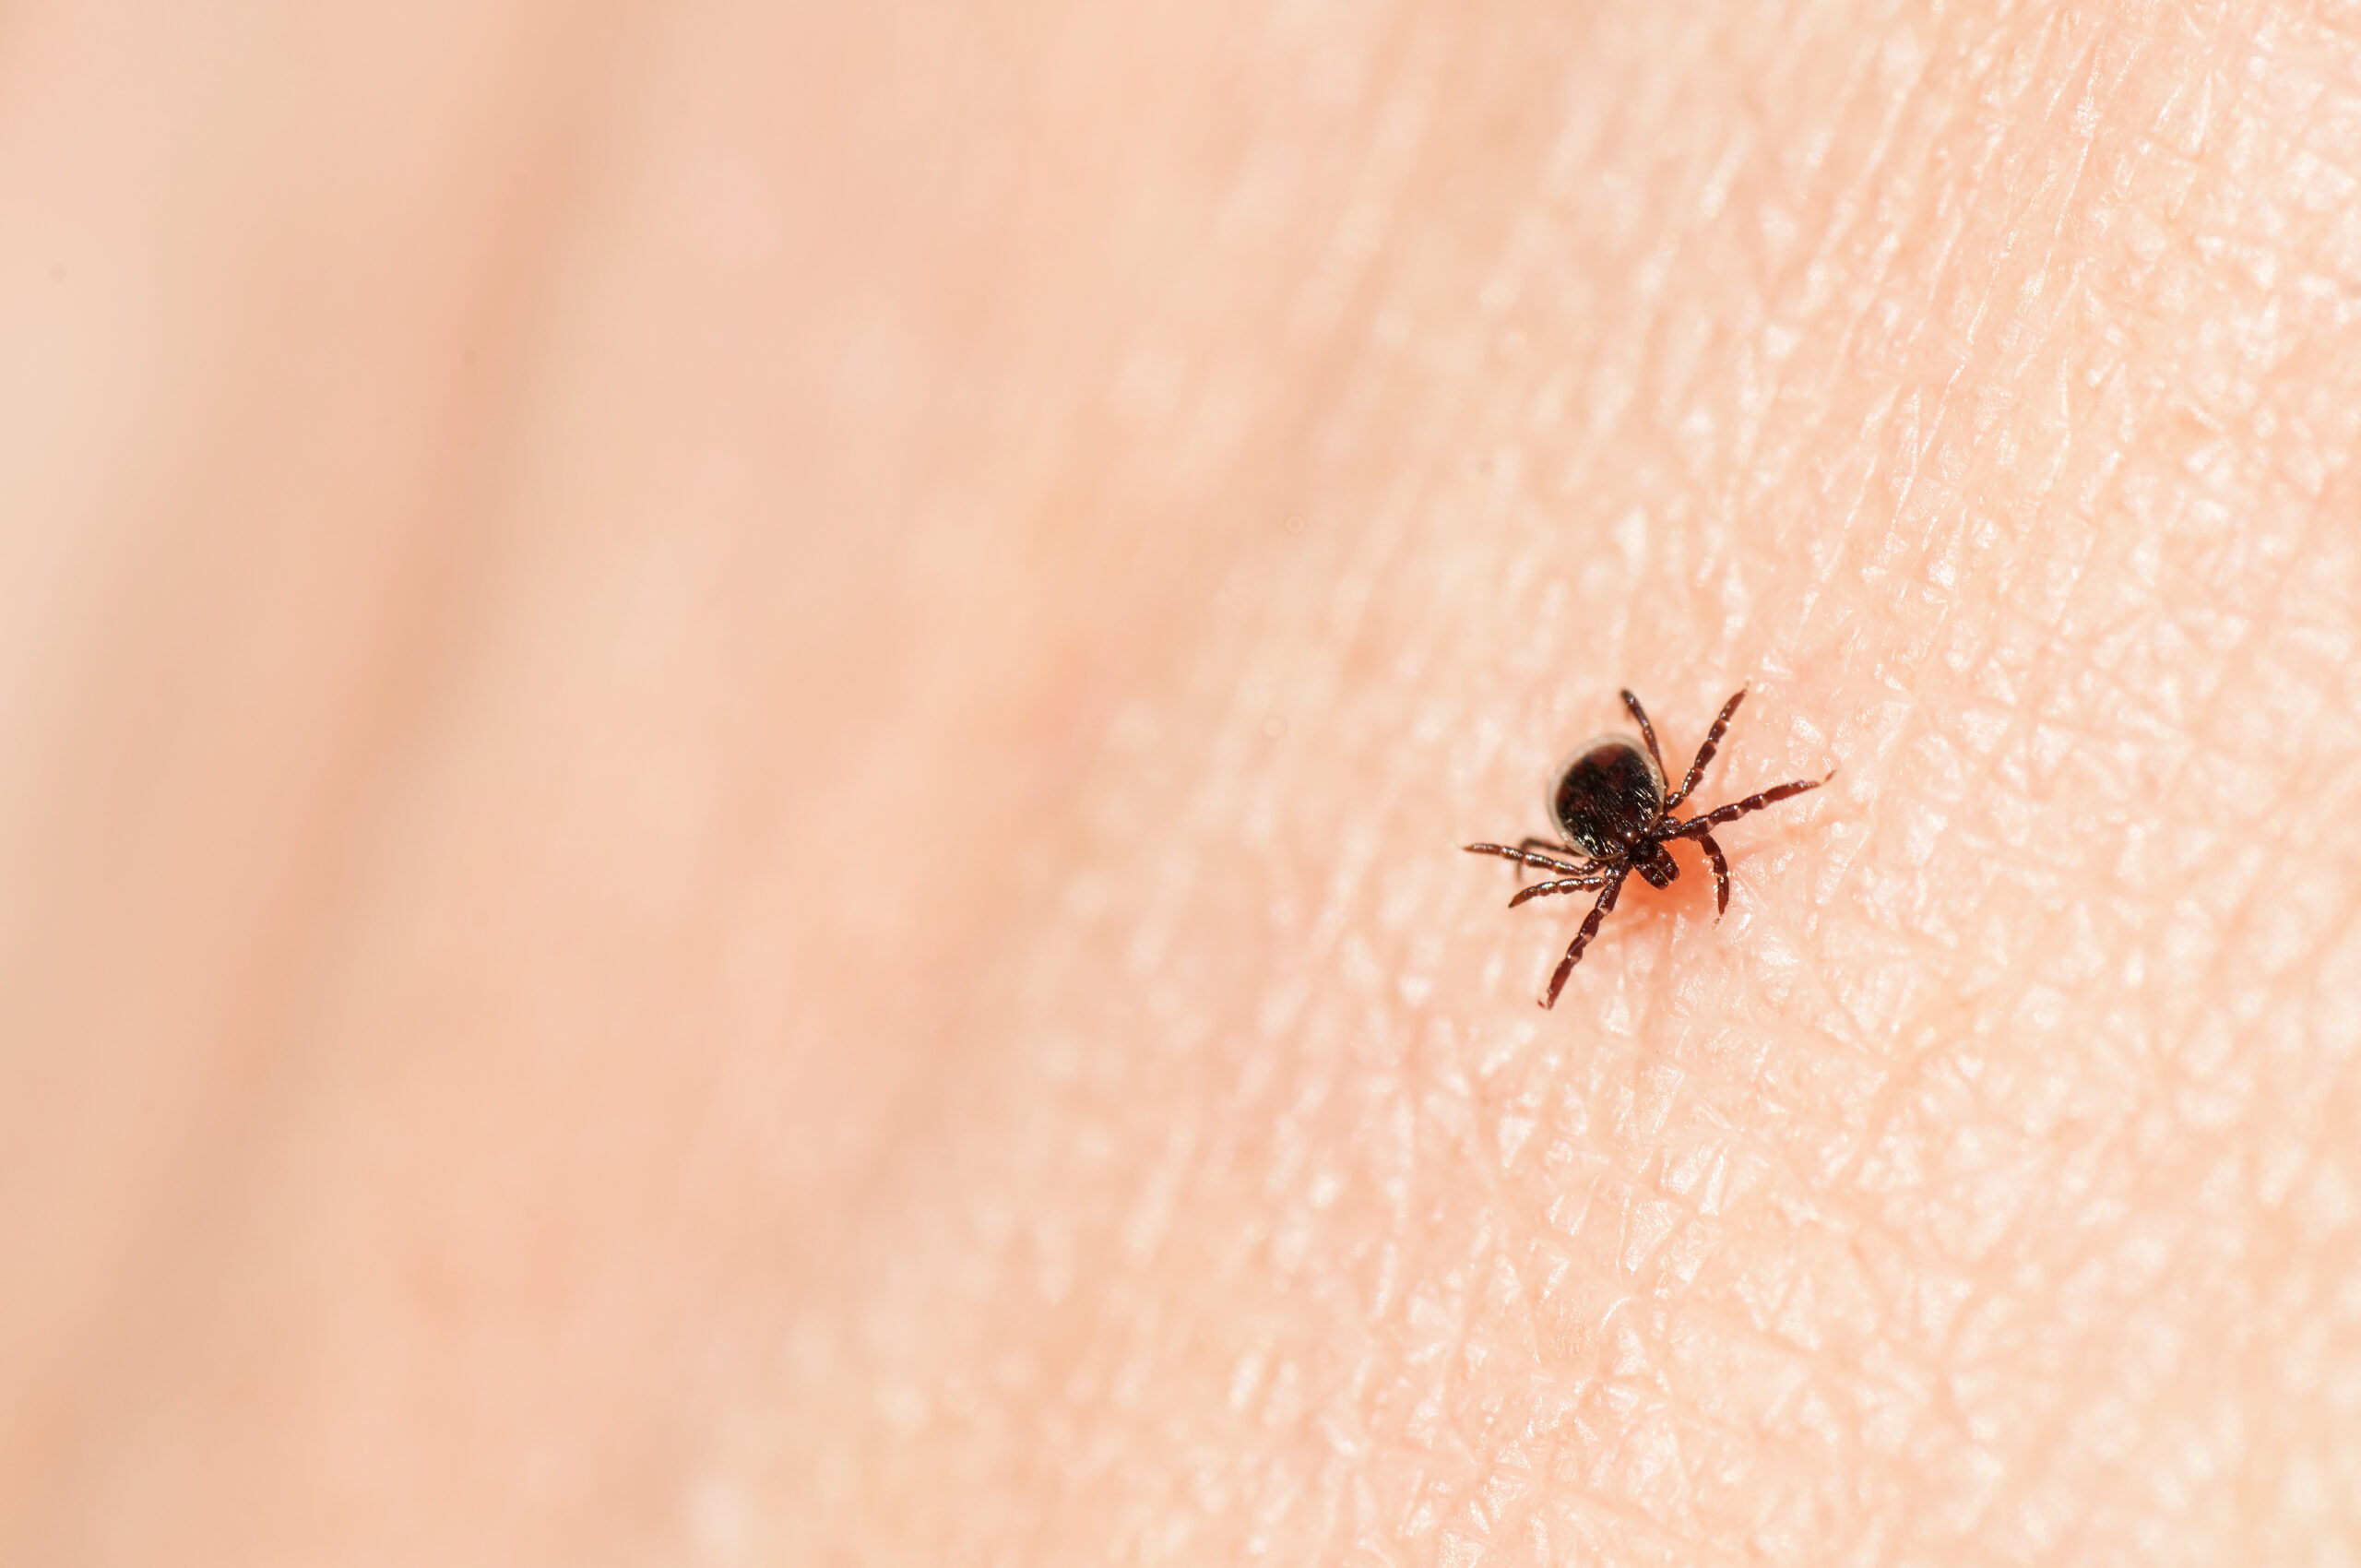 You’re less likely to get a tick bite if you steer clear of these spots